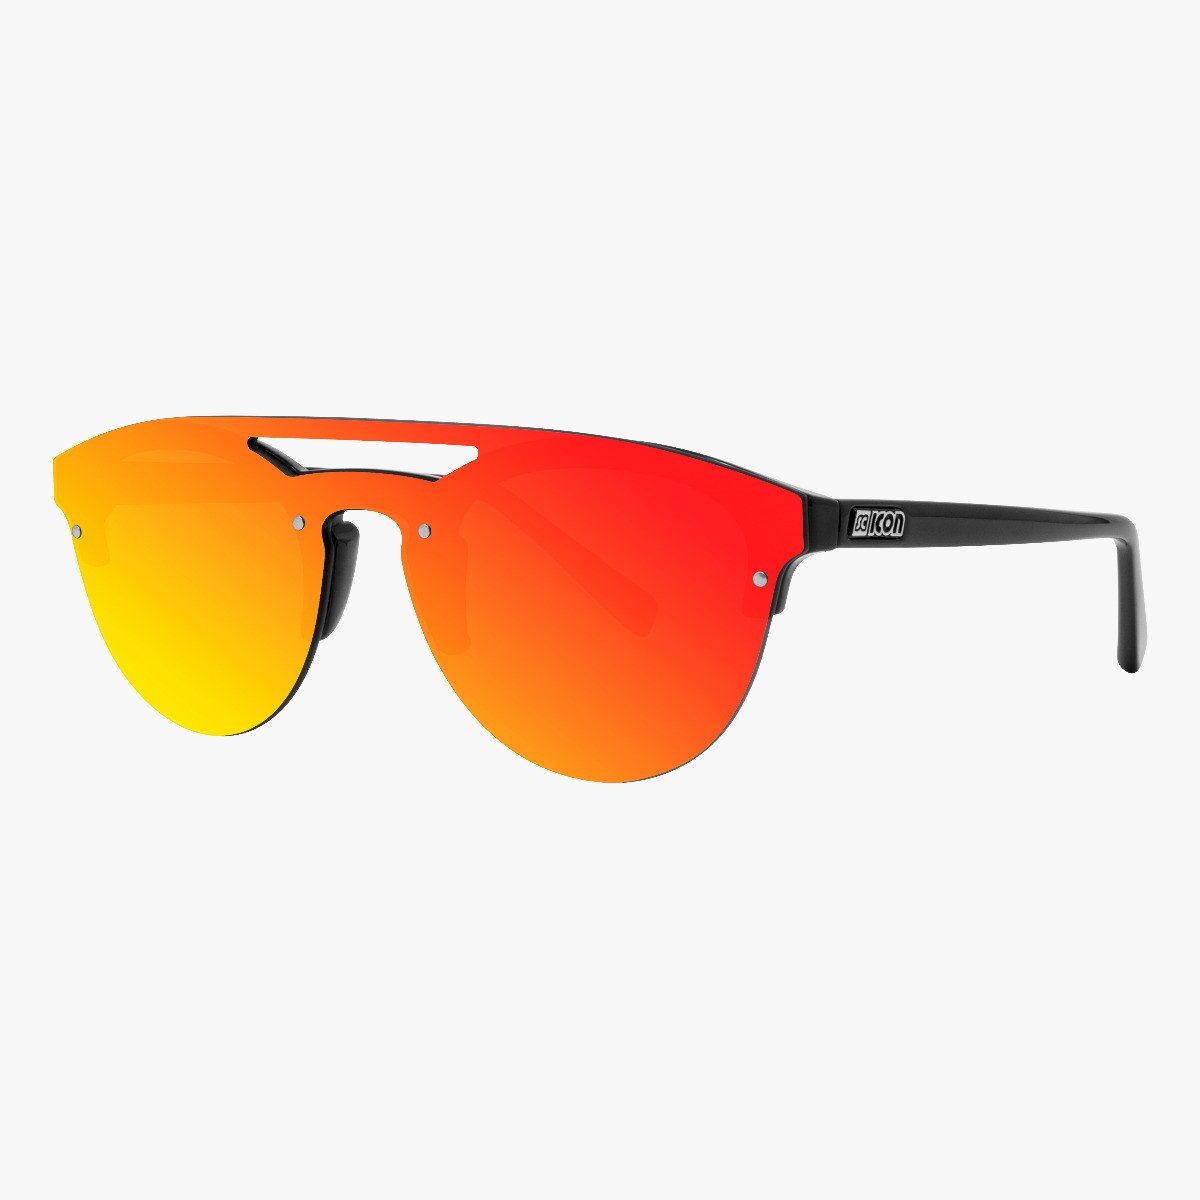 Scicon Sports | Cover Lifestyle Unisex Sunglasses - Black Frame, Red Lens - EY160602